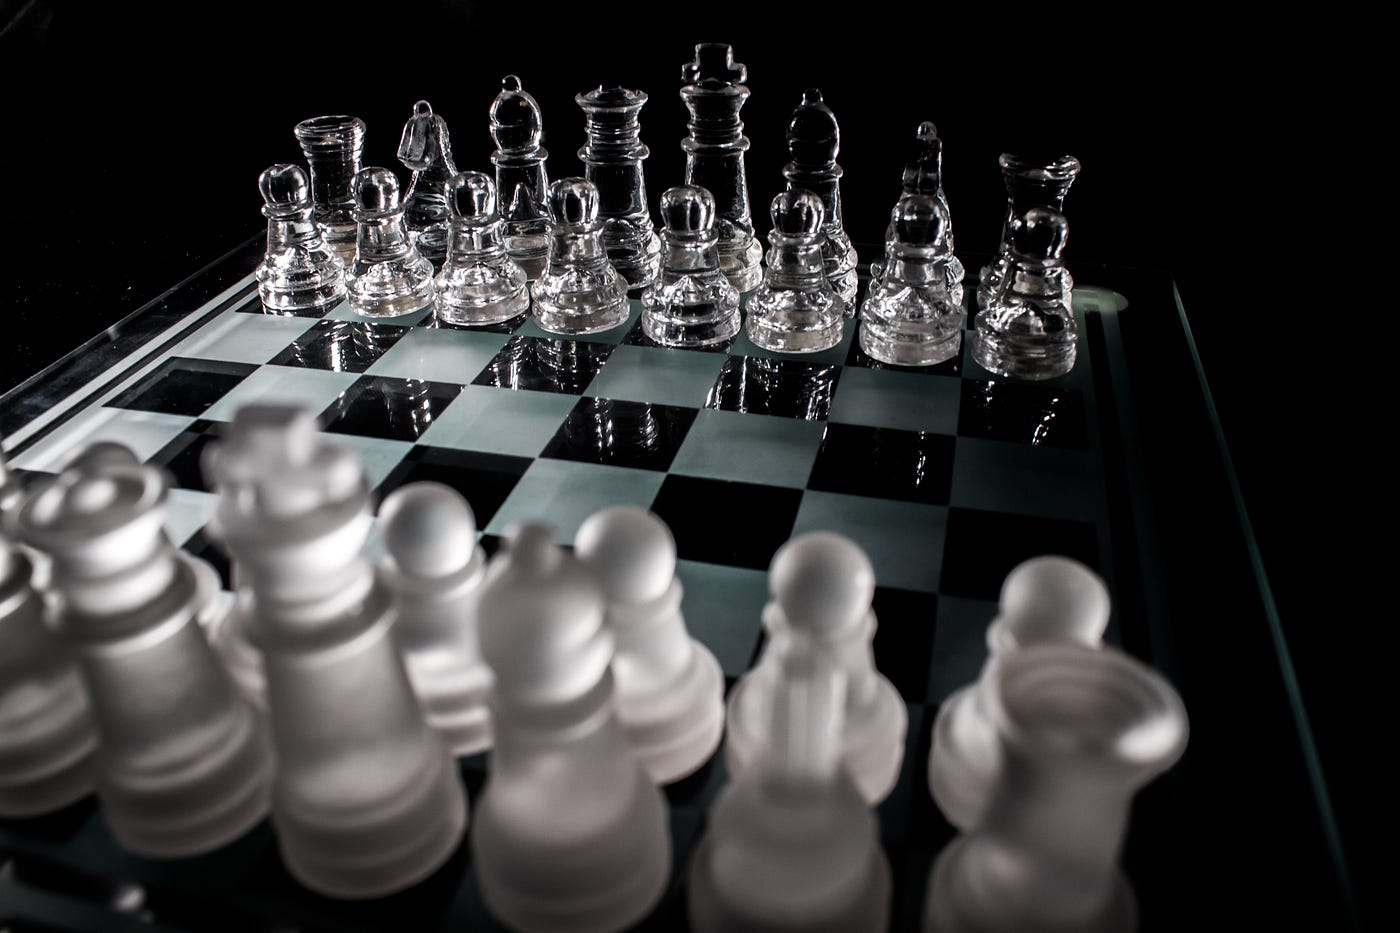 What is the purpose of the clock in chess? - Quora